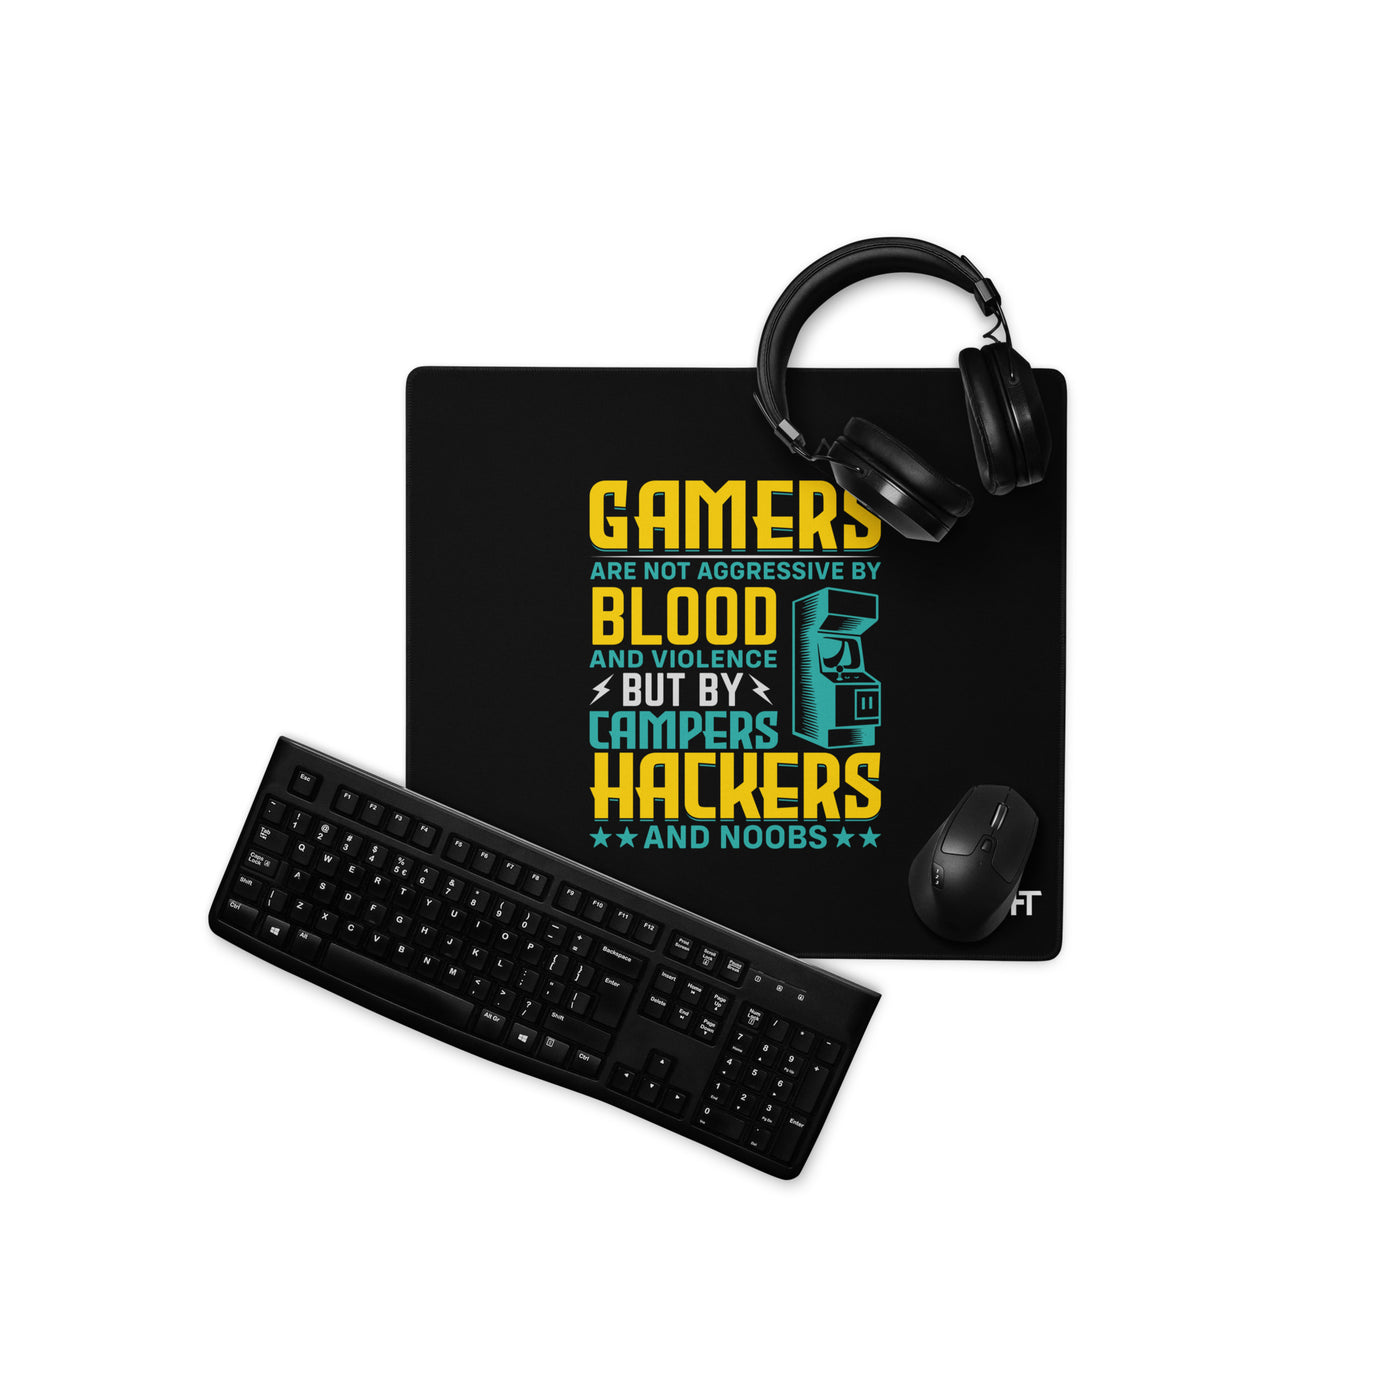 Gamers are not Aggressive by Blood and Violence ( rasel ) - Desk Mat